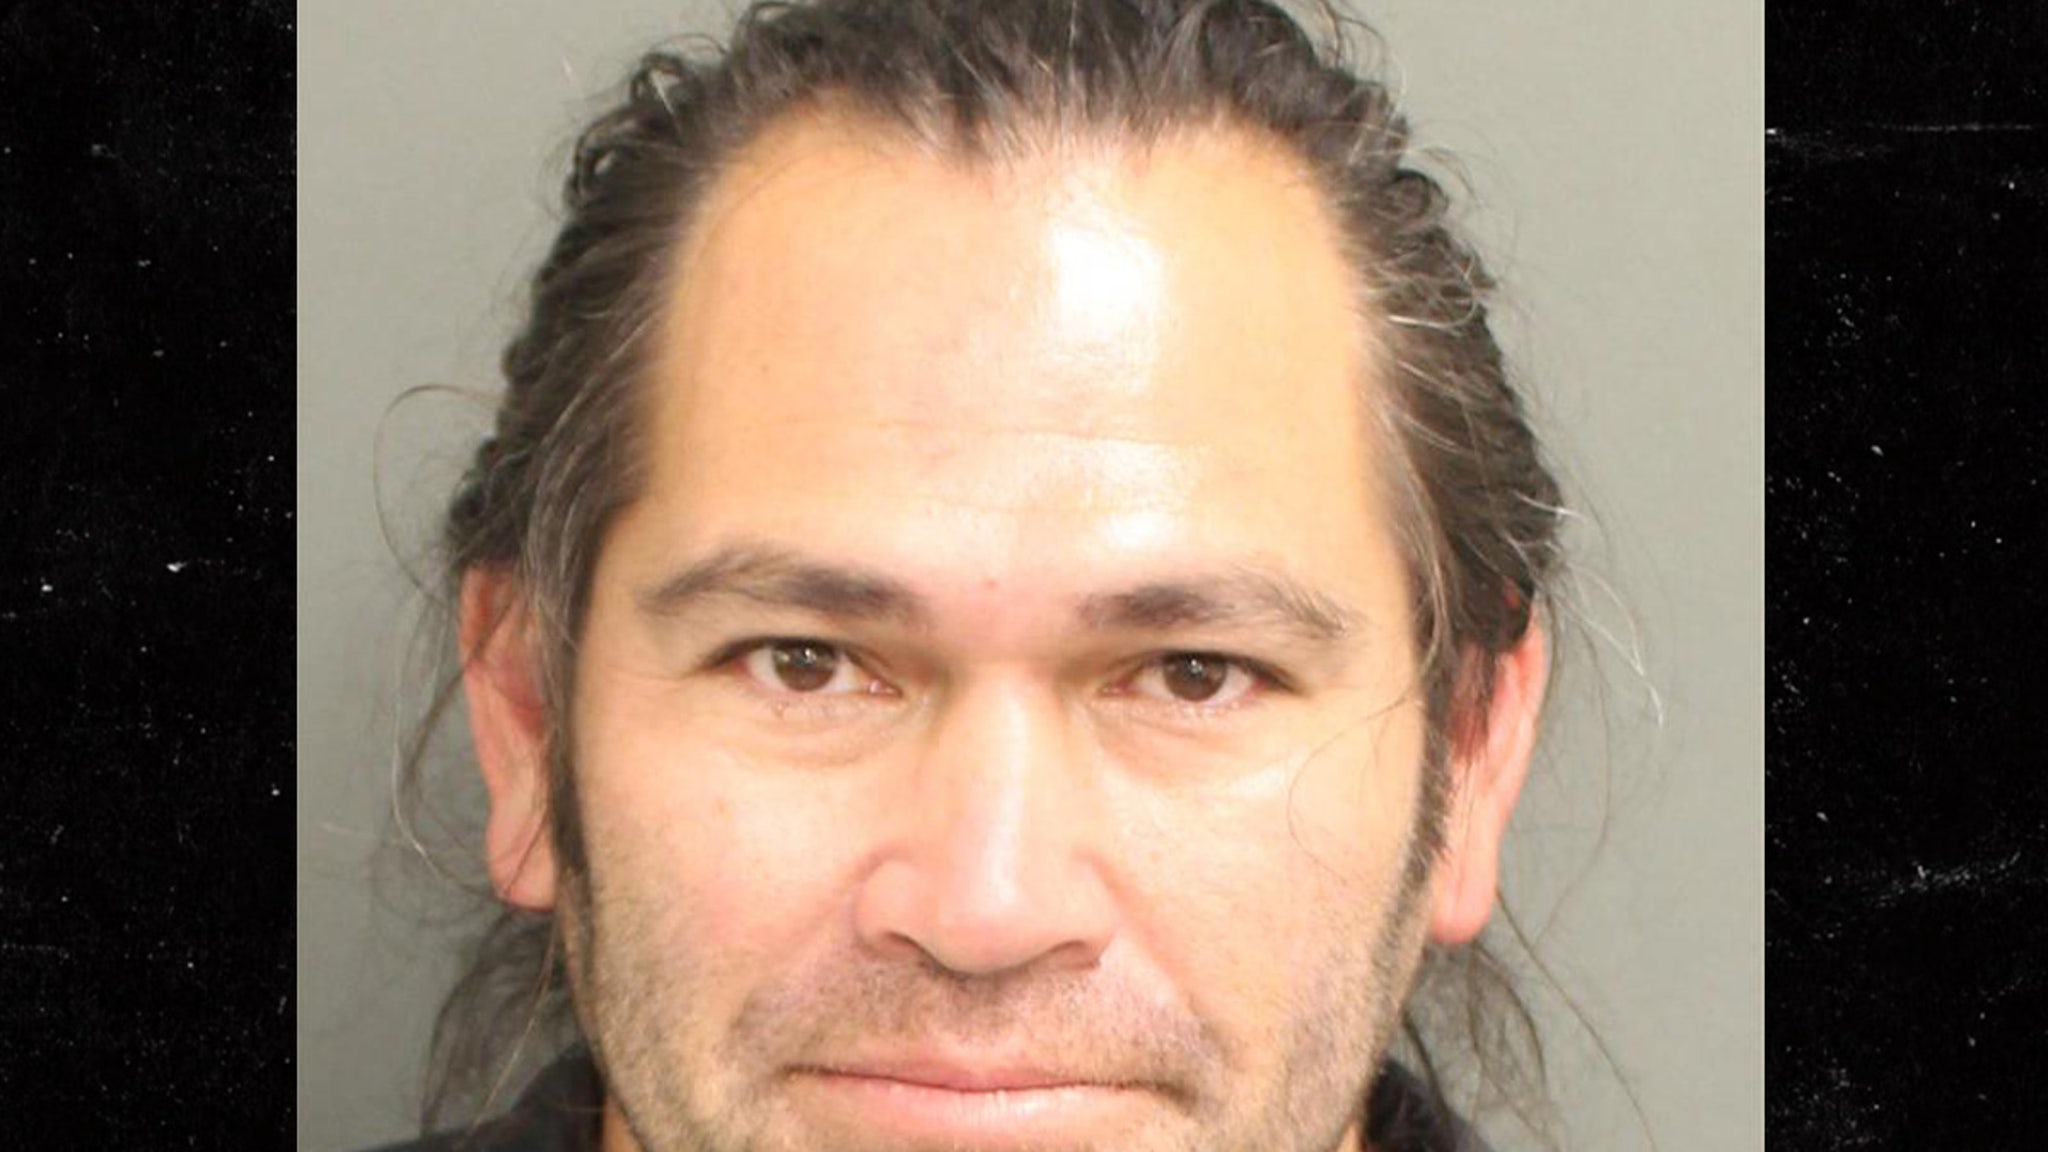 Johnny Damon arrested for DUI, wife scheduled for assaulting police officer during a parade